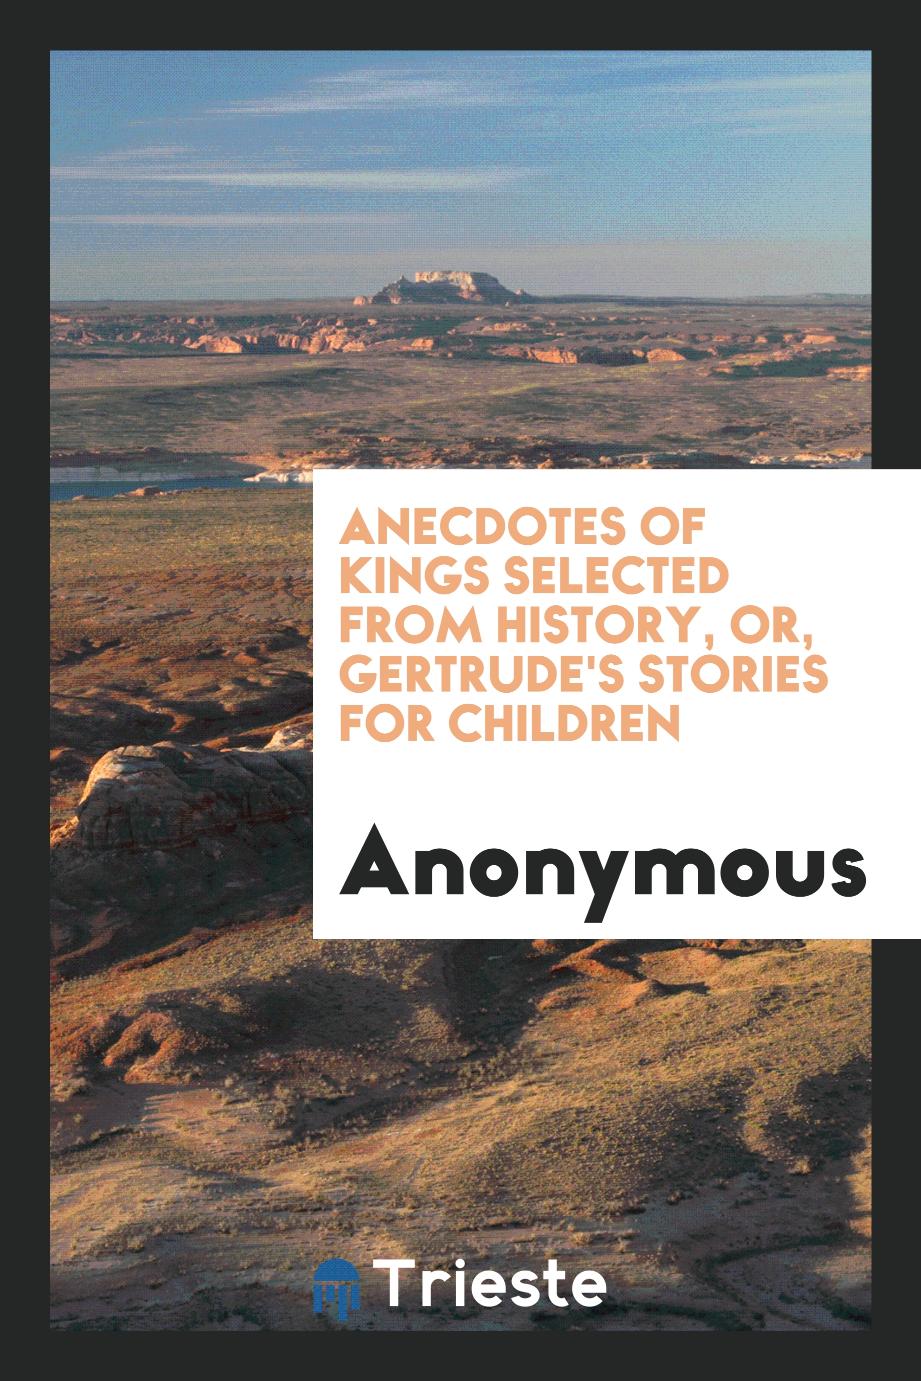 Anecdotes of kings selected from history, or, Gertrude's stories for children